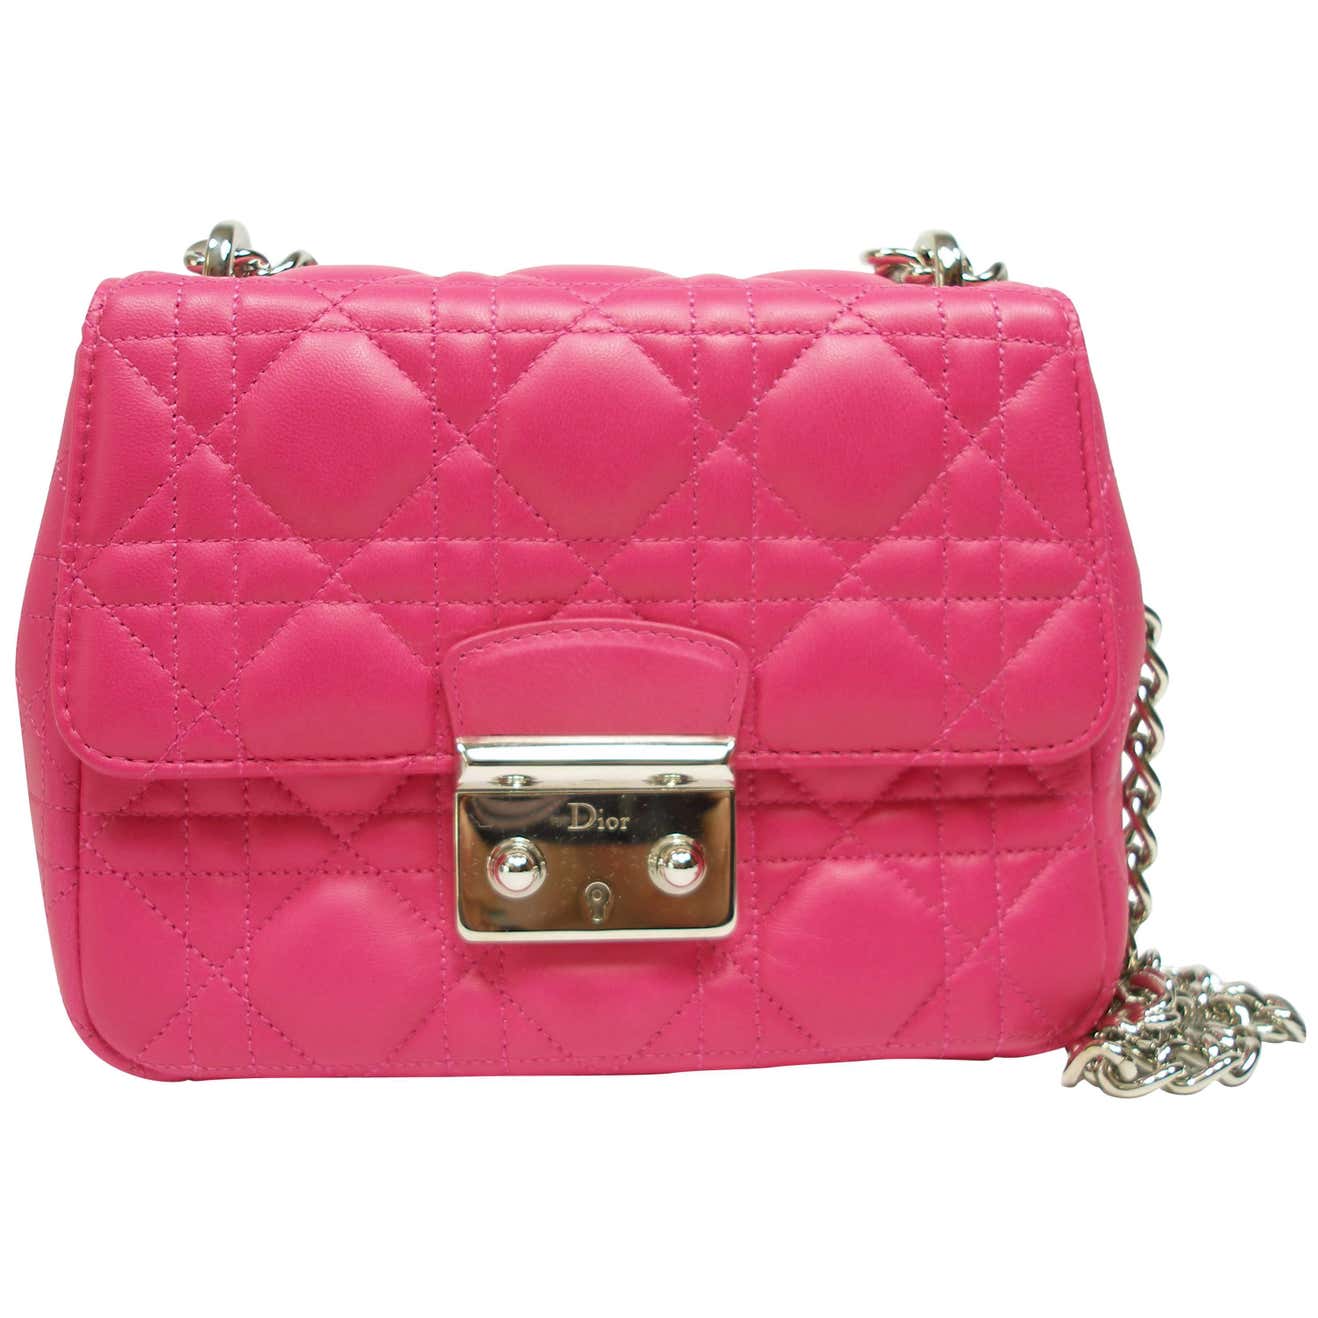 Dior Miss Dior Bag pink cannage Leather Small Size / BRAND NEW at ...